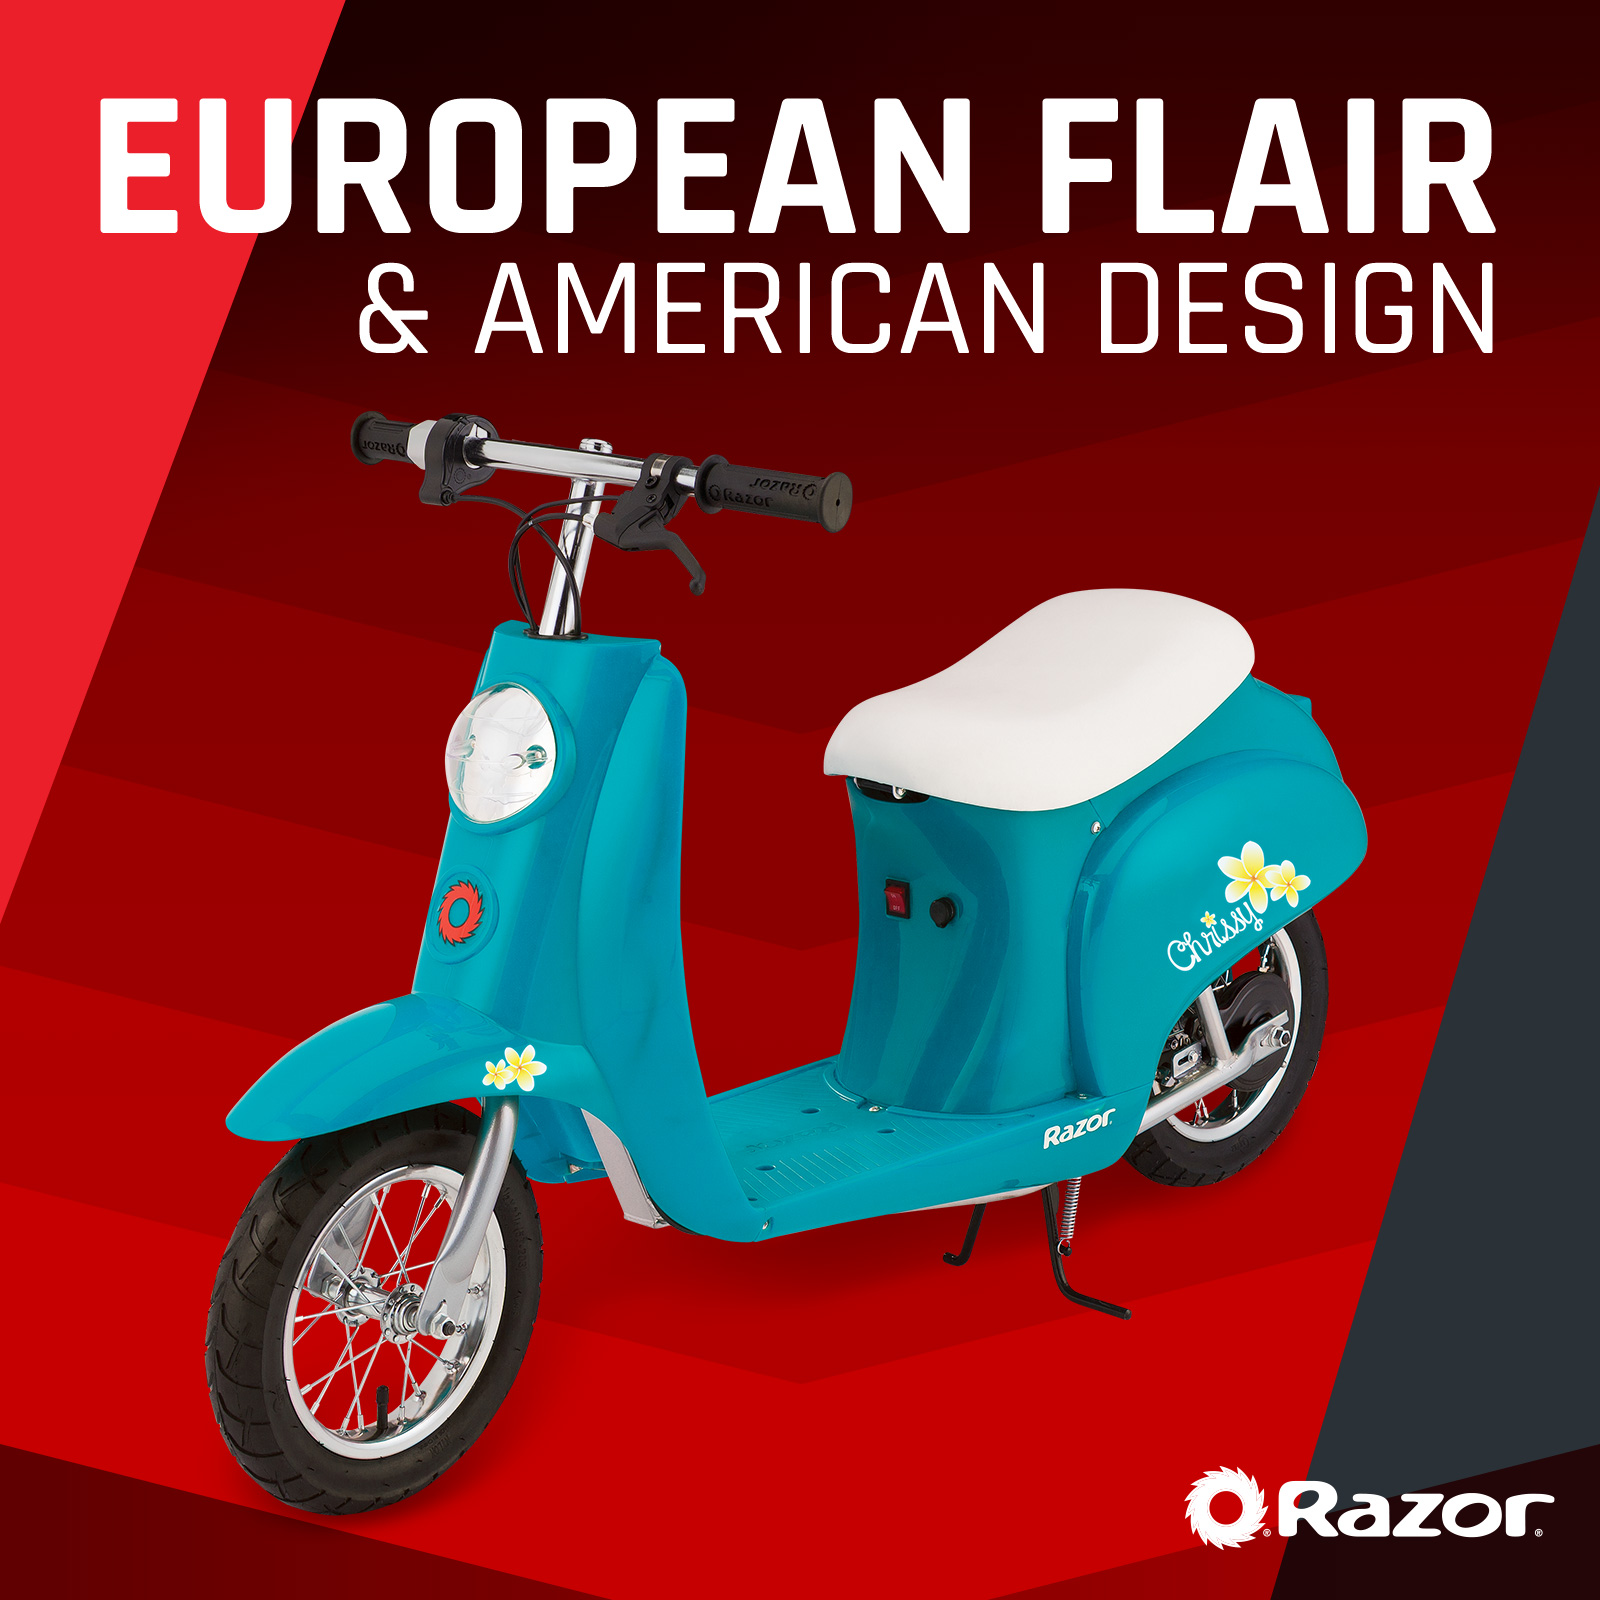 Razor Pocket Mod - Chrissy Turquoise, 24V Miniature Euro-Style Seated Electric Scooter, up to 15 mph - image 4 of 9